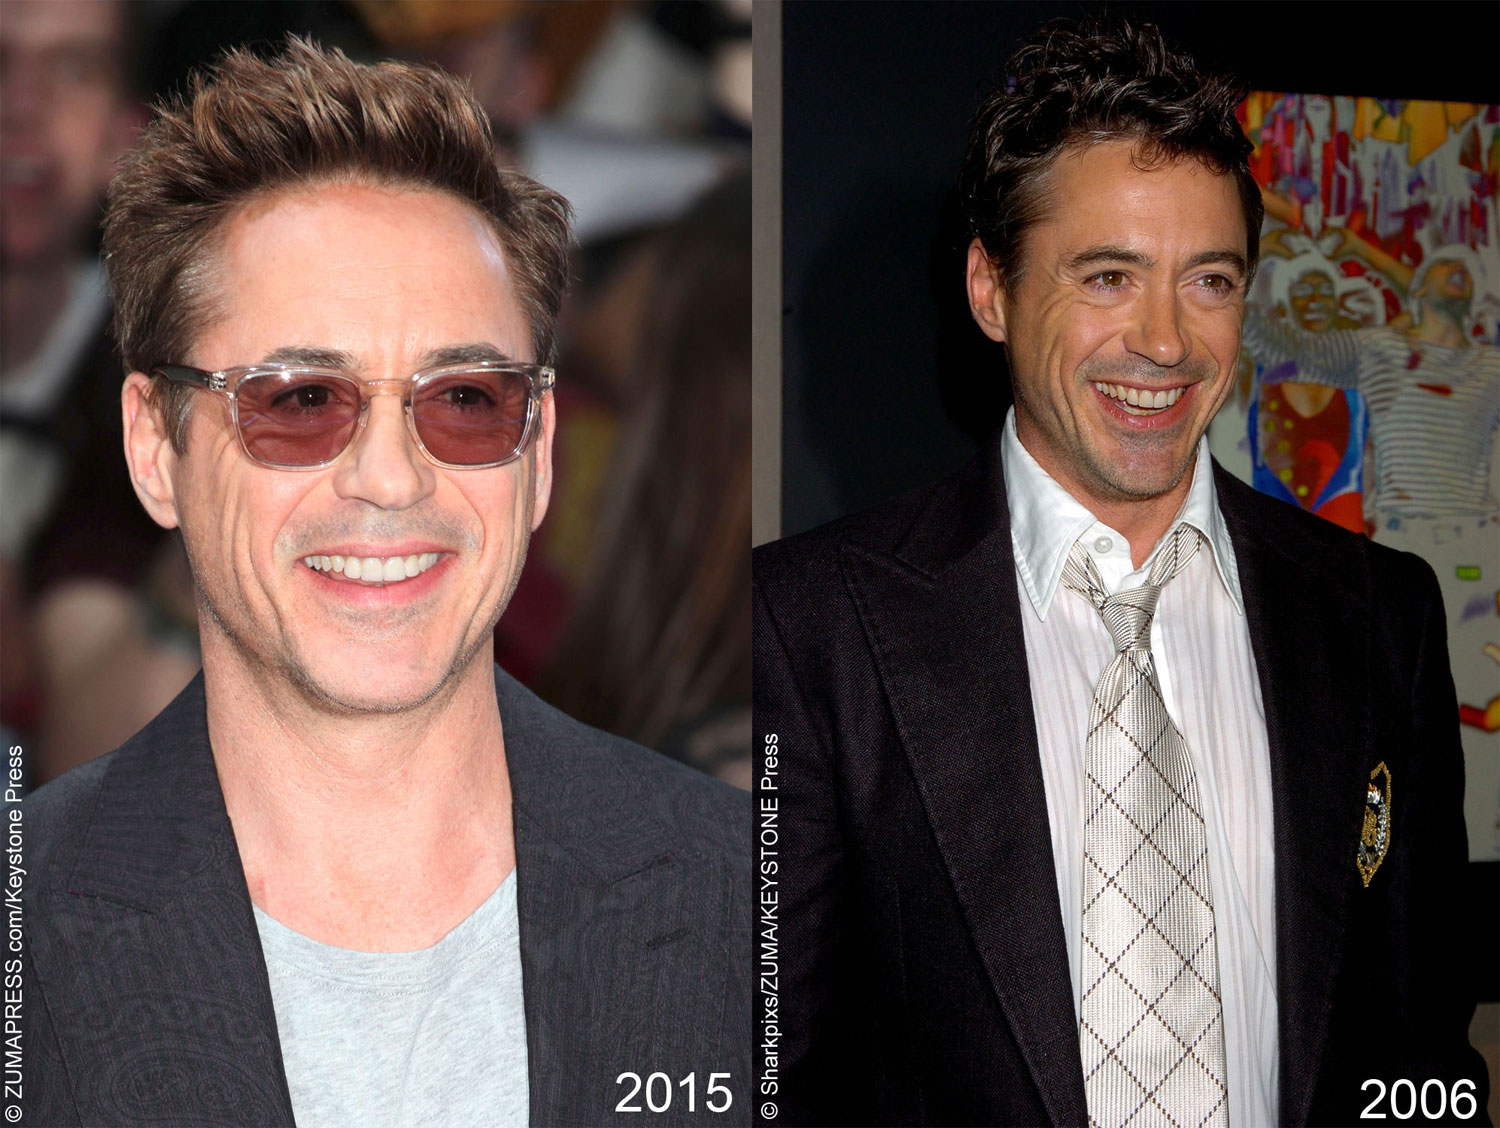 Robert Downey Jr. has been a star of some big movies in the last 10 years, and even received an Oscar nod for Tropic Thunder. He’s hardly changed over the years at all – he definitely doesn’t look his age.